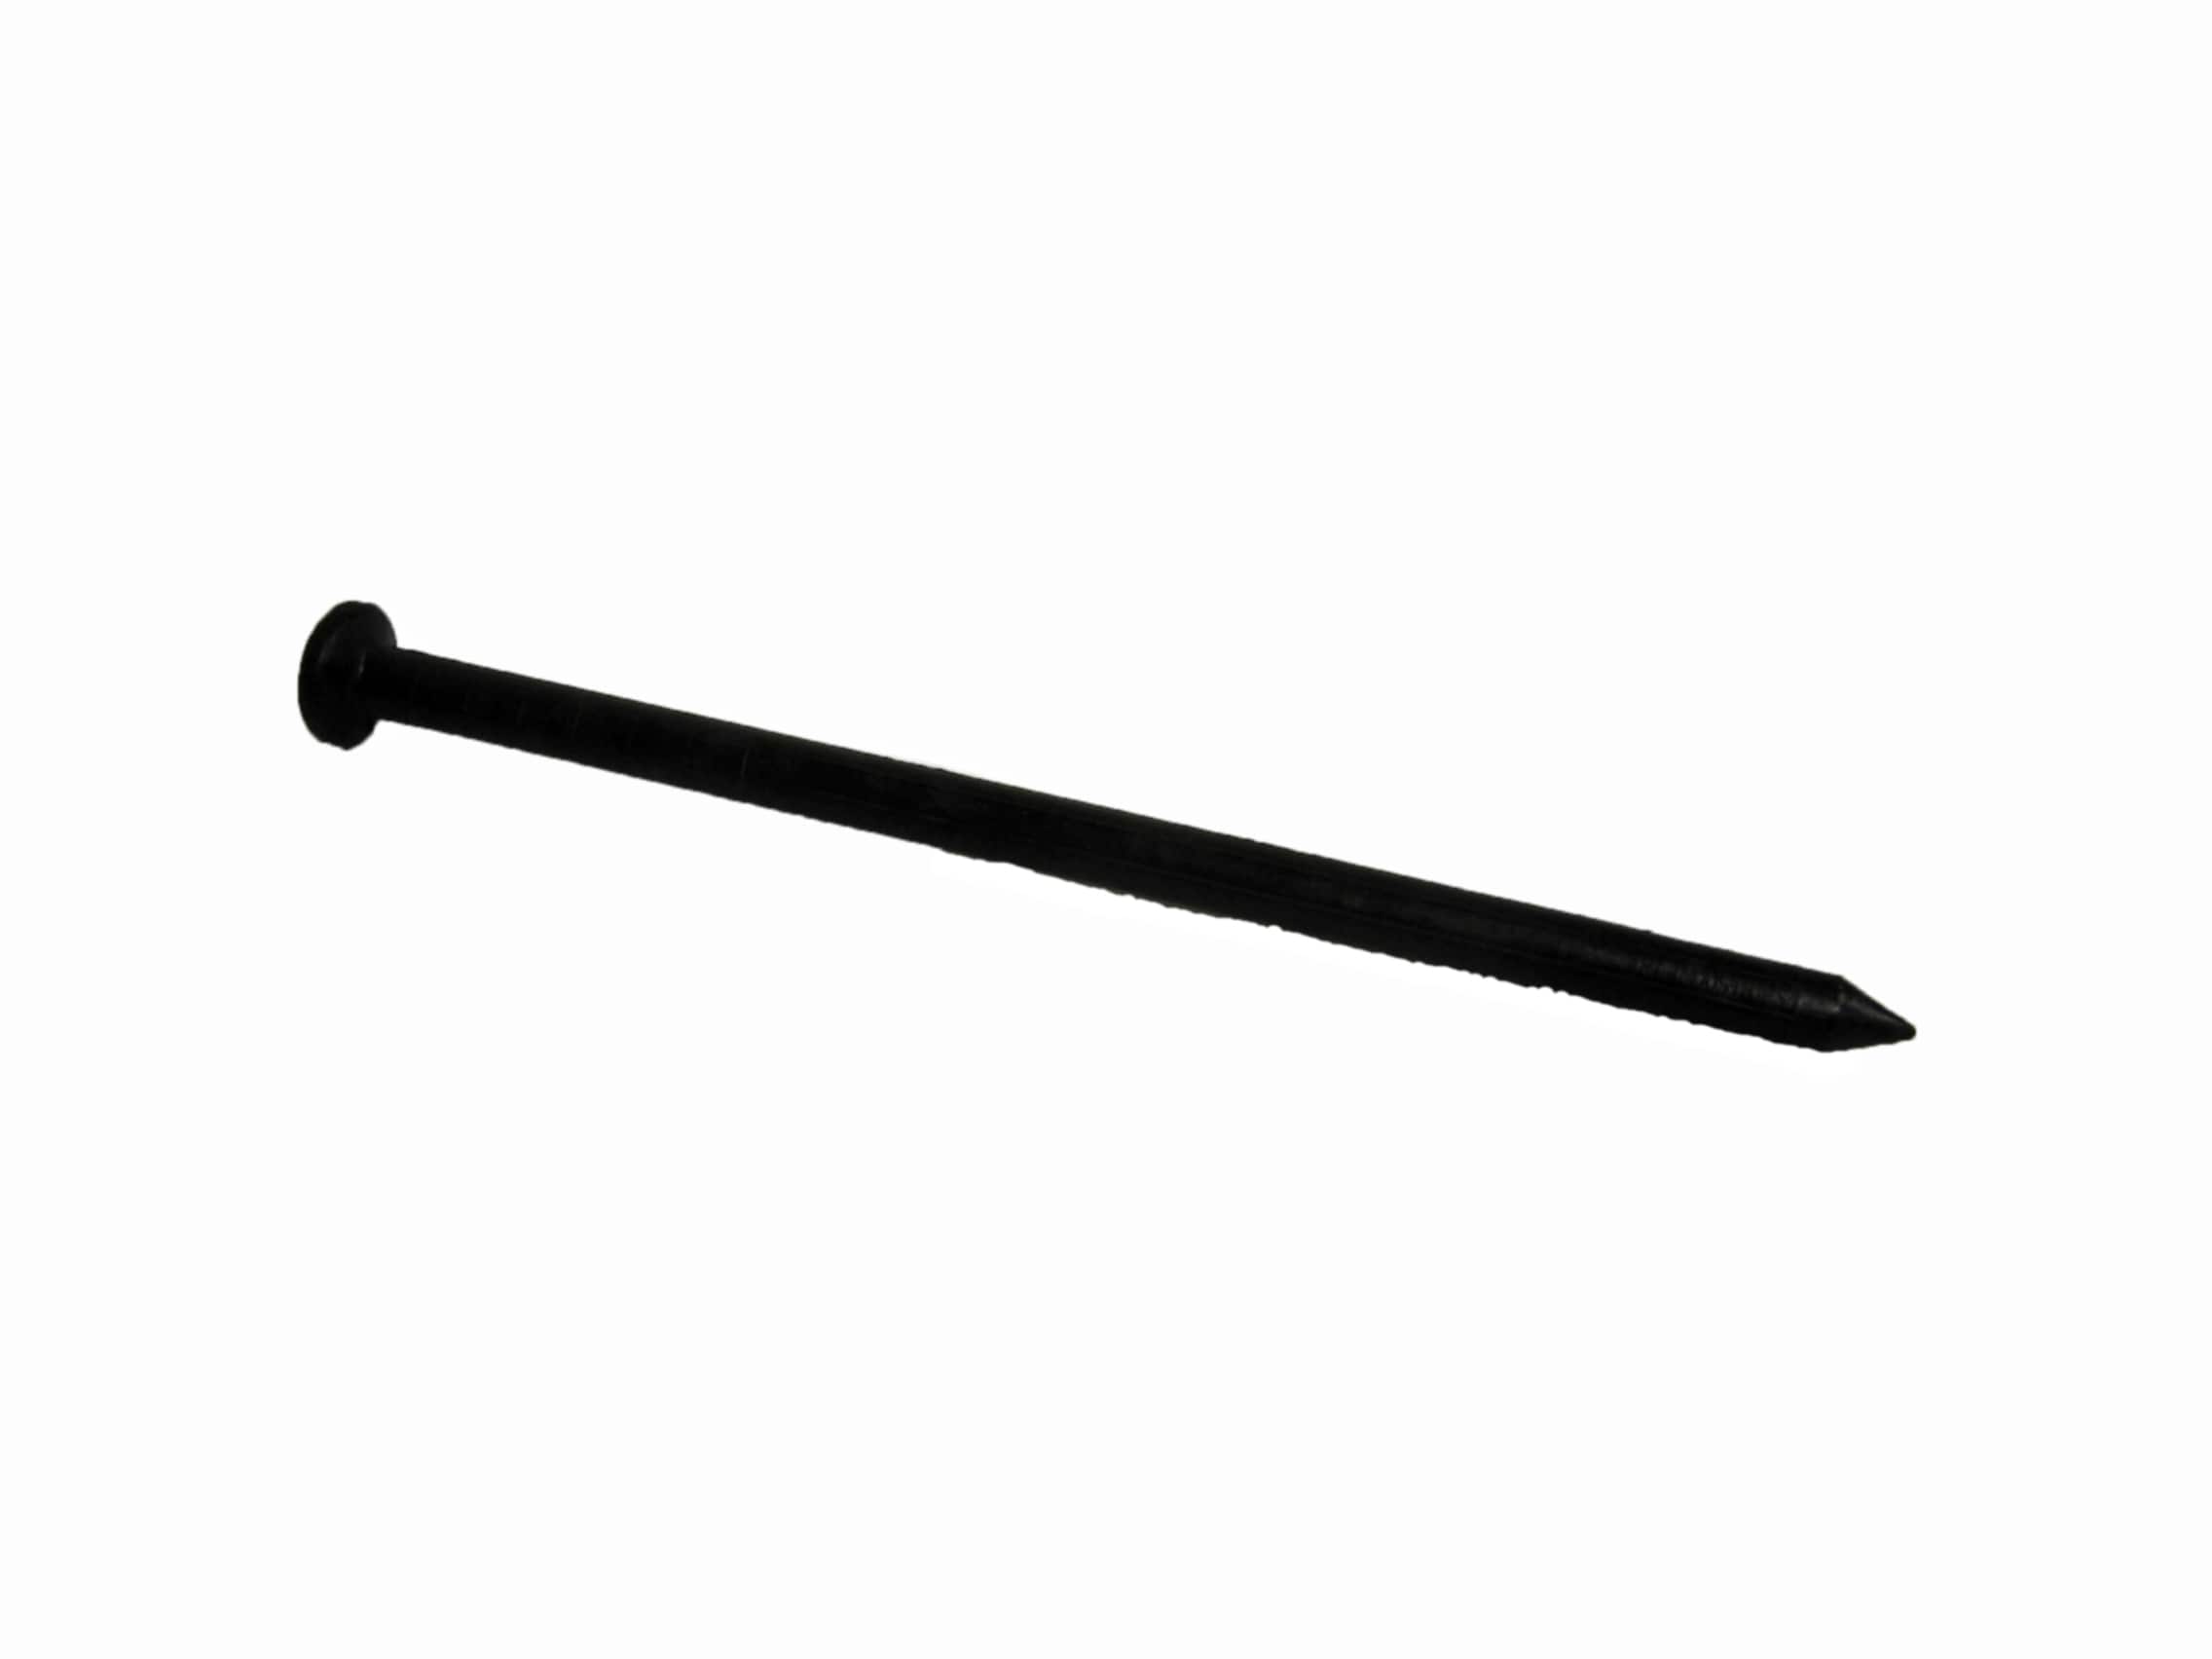 Black Plastic Stick with Beveled/ Pointed Ends